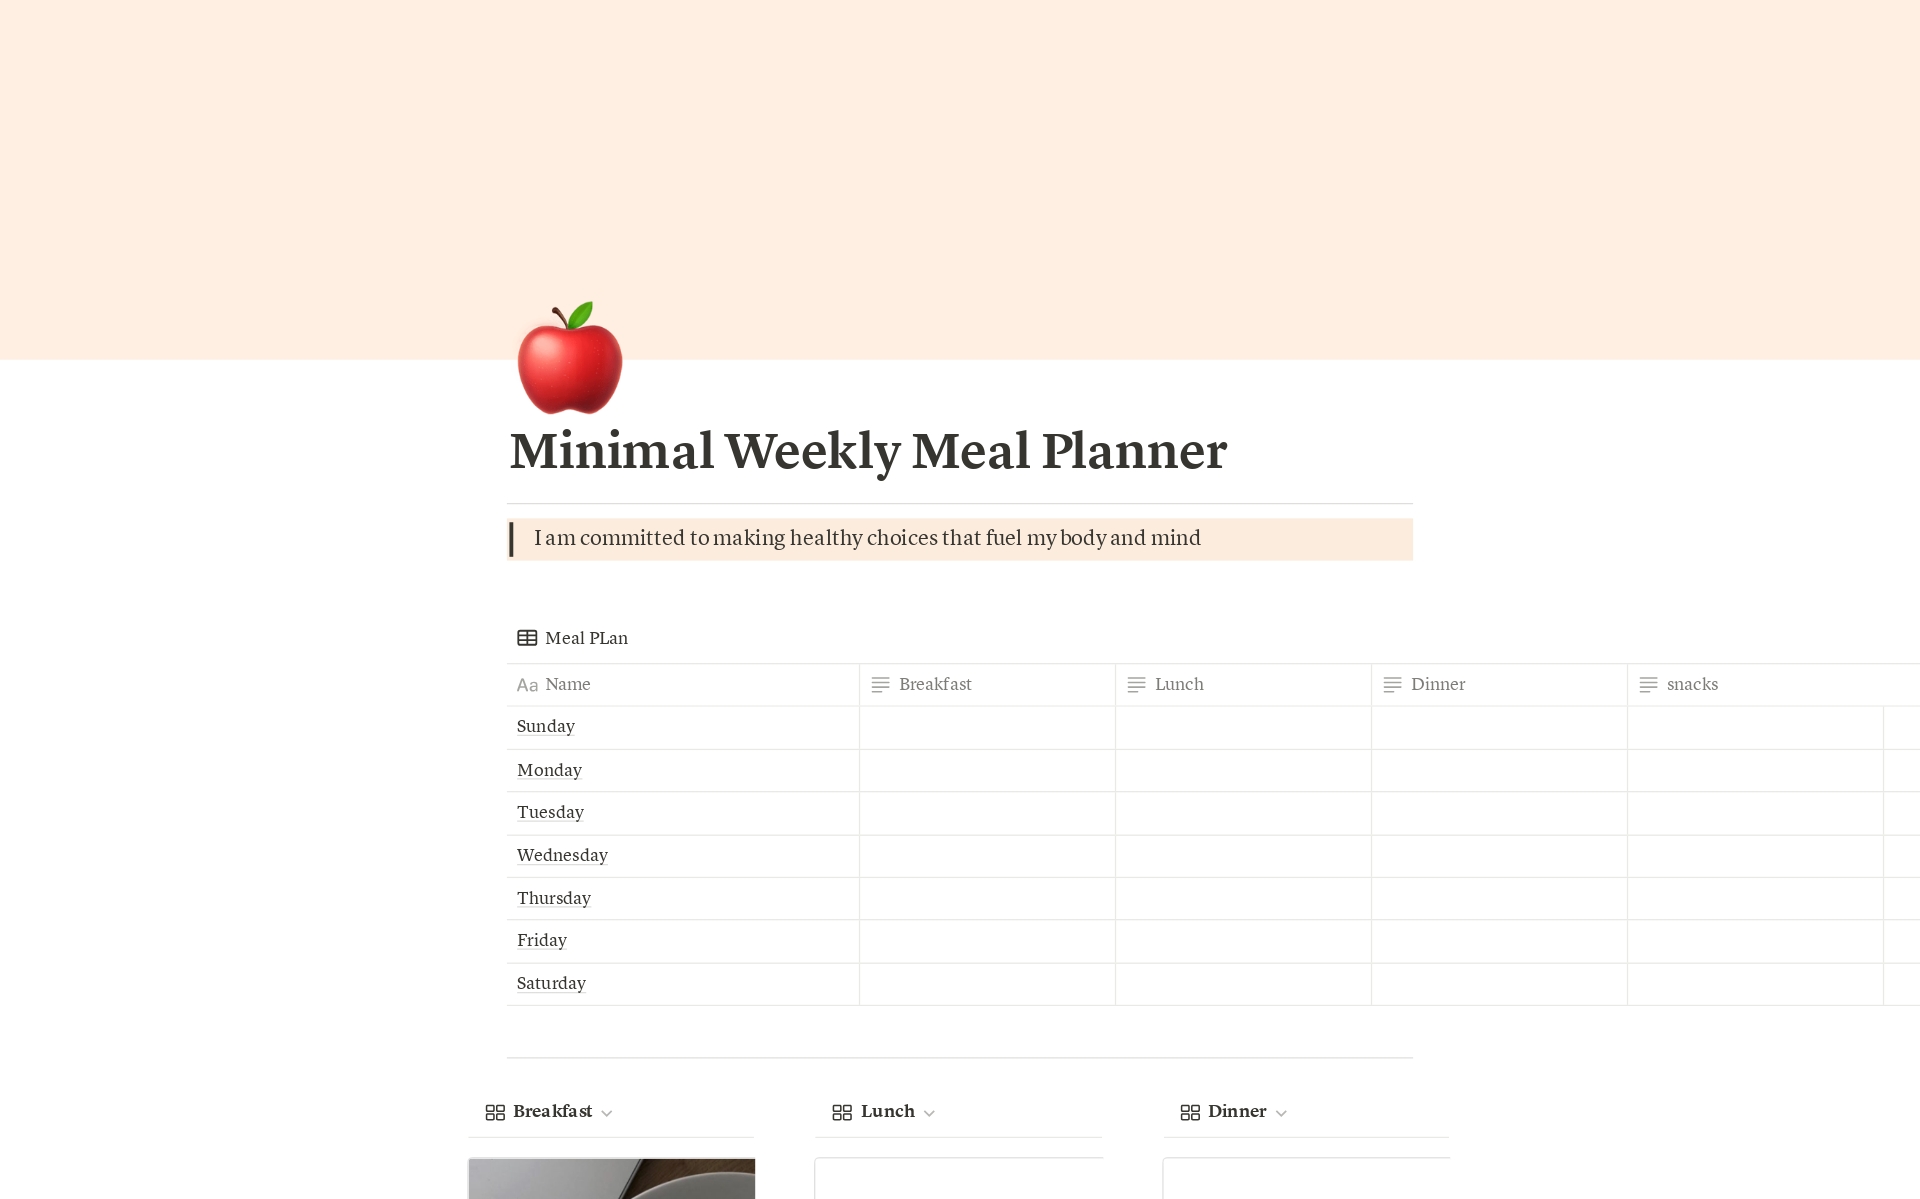 This minimal weekly meal plan template features a graph listing all the days of the week starting from Sunday. Below the graph, there are three gallery-view spaces dedicated to recipes for breakfast, lunch, and dinner.